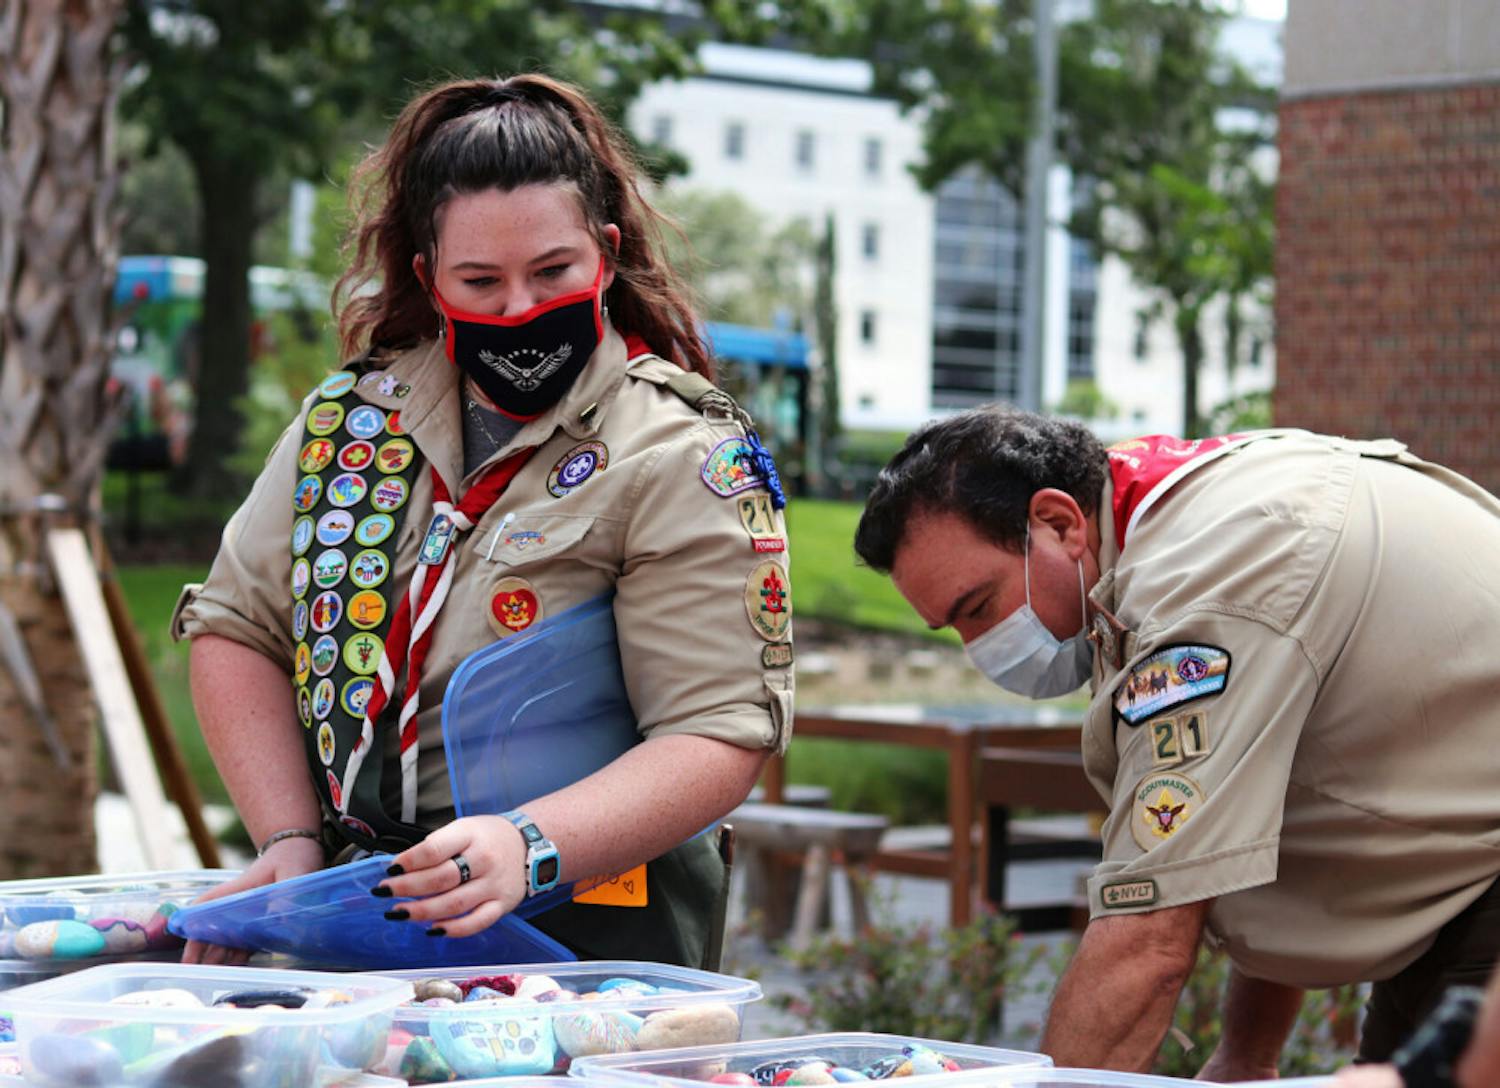 Olivia Foli, 16, an eagle scout who helped start Gainesville’s first female troop, and her dad, Randy Foli, take some of the 676 painted healing stones out of its containers at the UF Health Children's Healing Garden on Friday, Sept. 18, 2020.